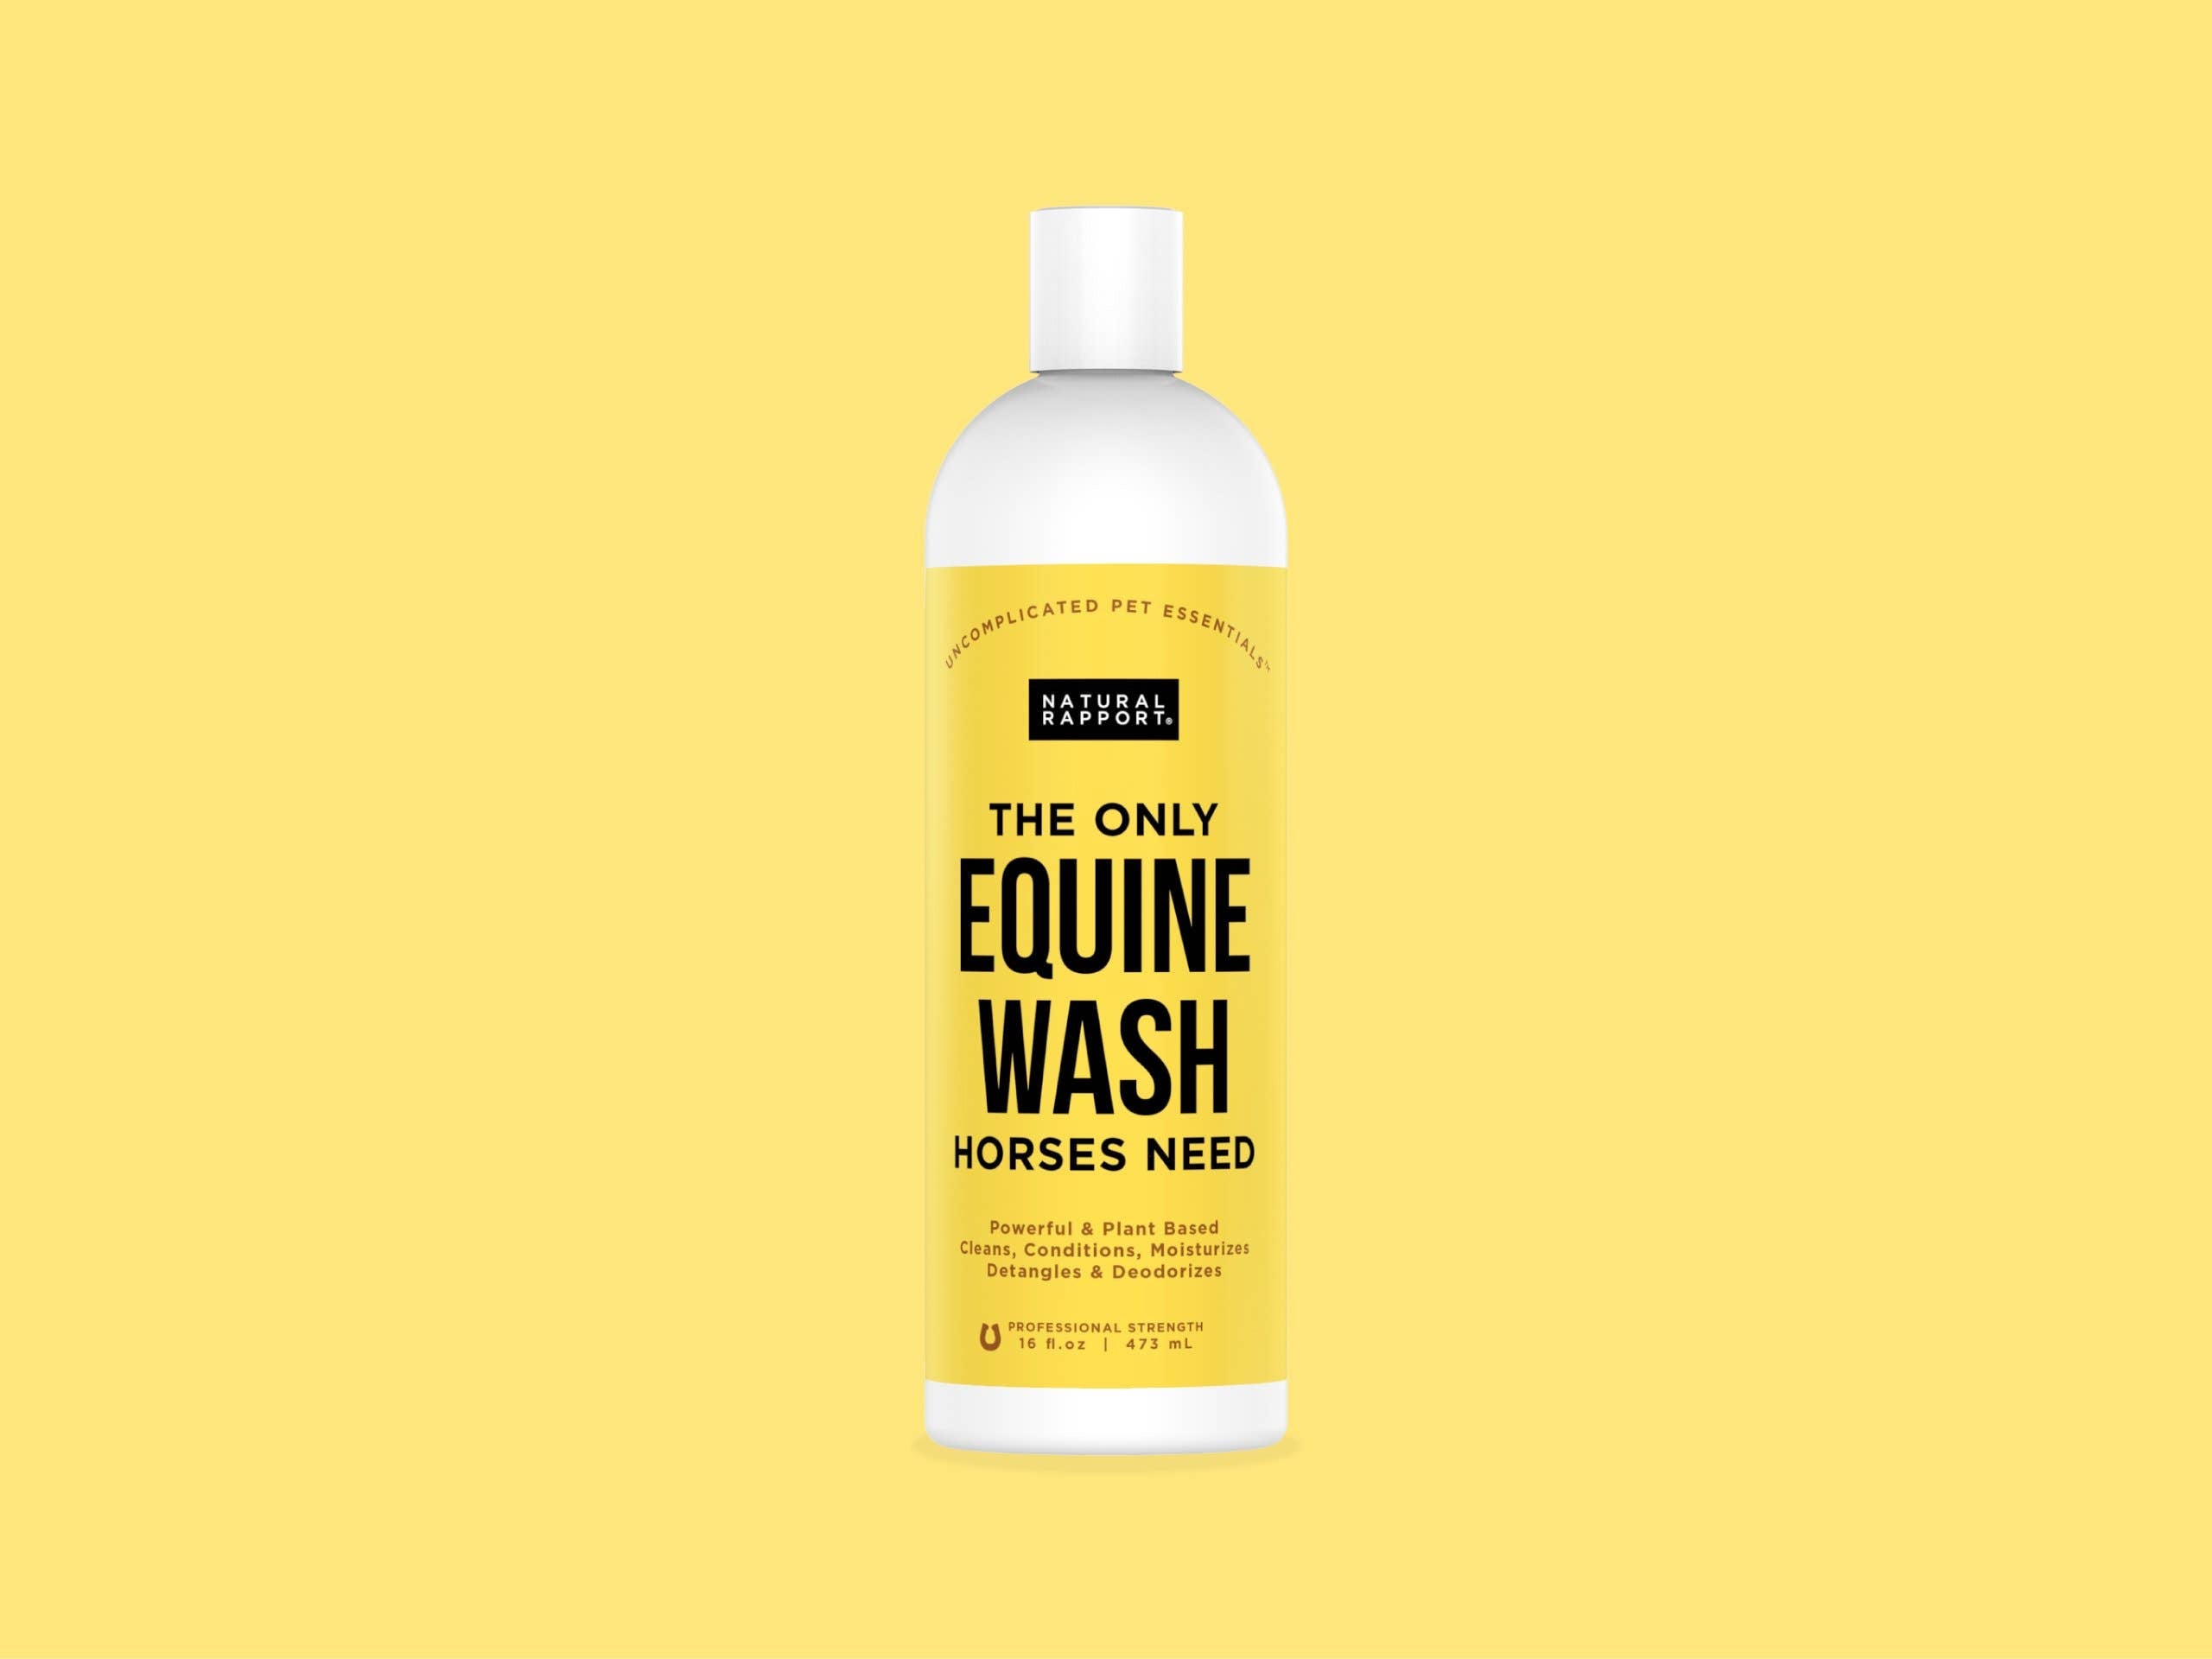 Natural Rapport - The Only Equine Wash Horses Need